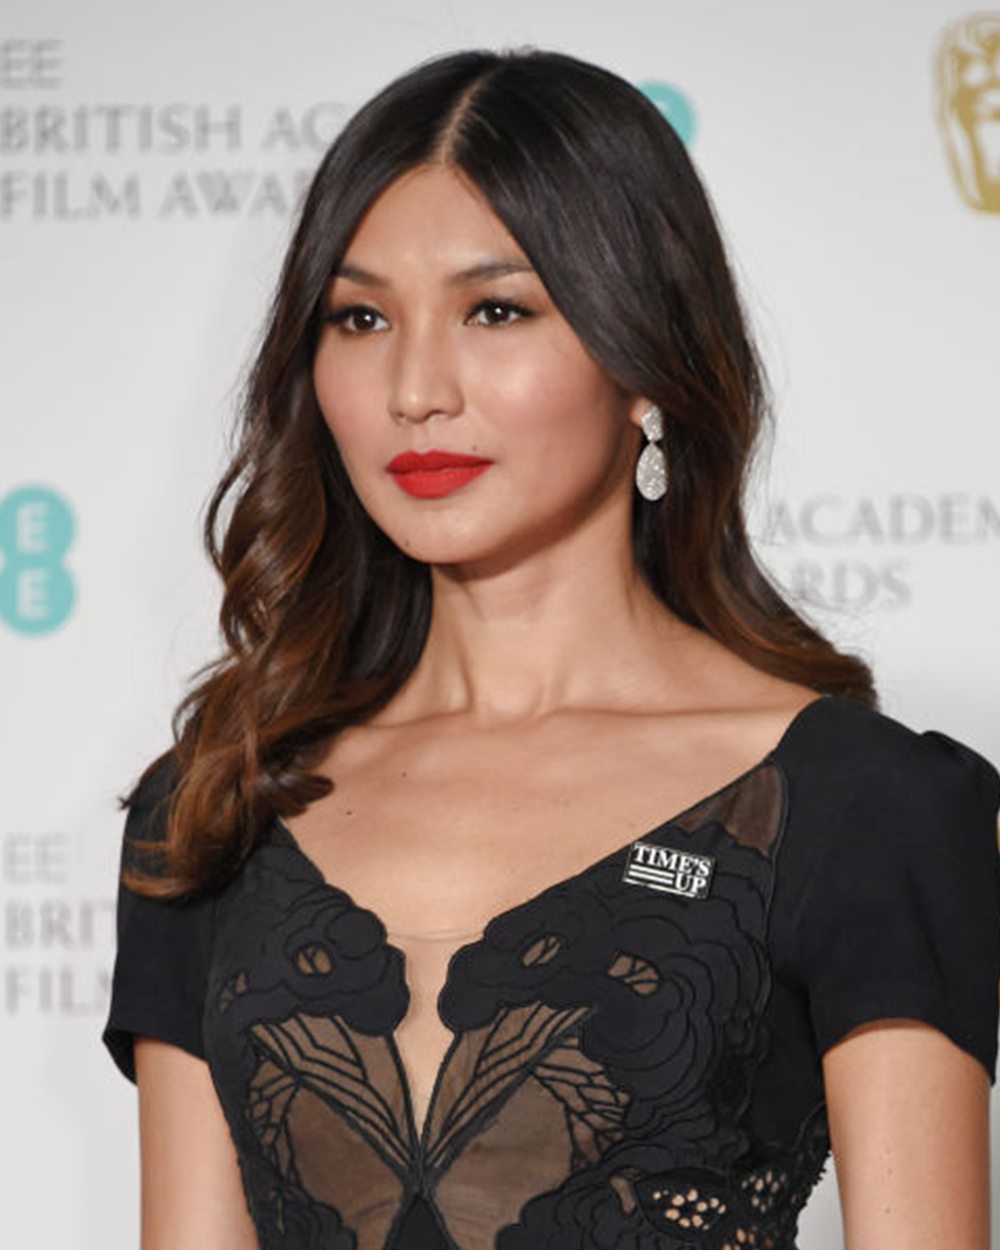 The best celebrity hair and makeup from the 2018 BAFTA Awards | Fashion Quarterly